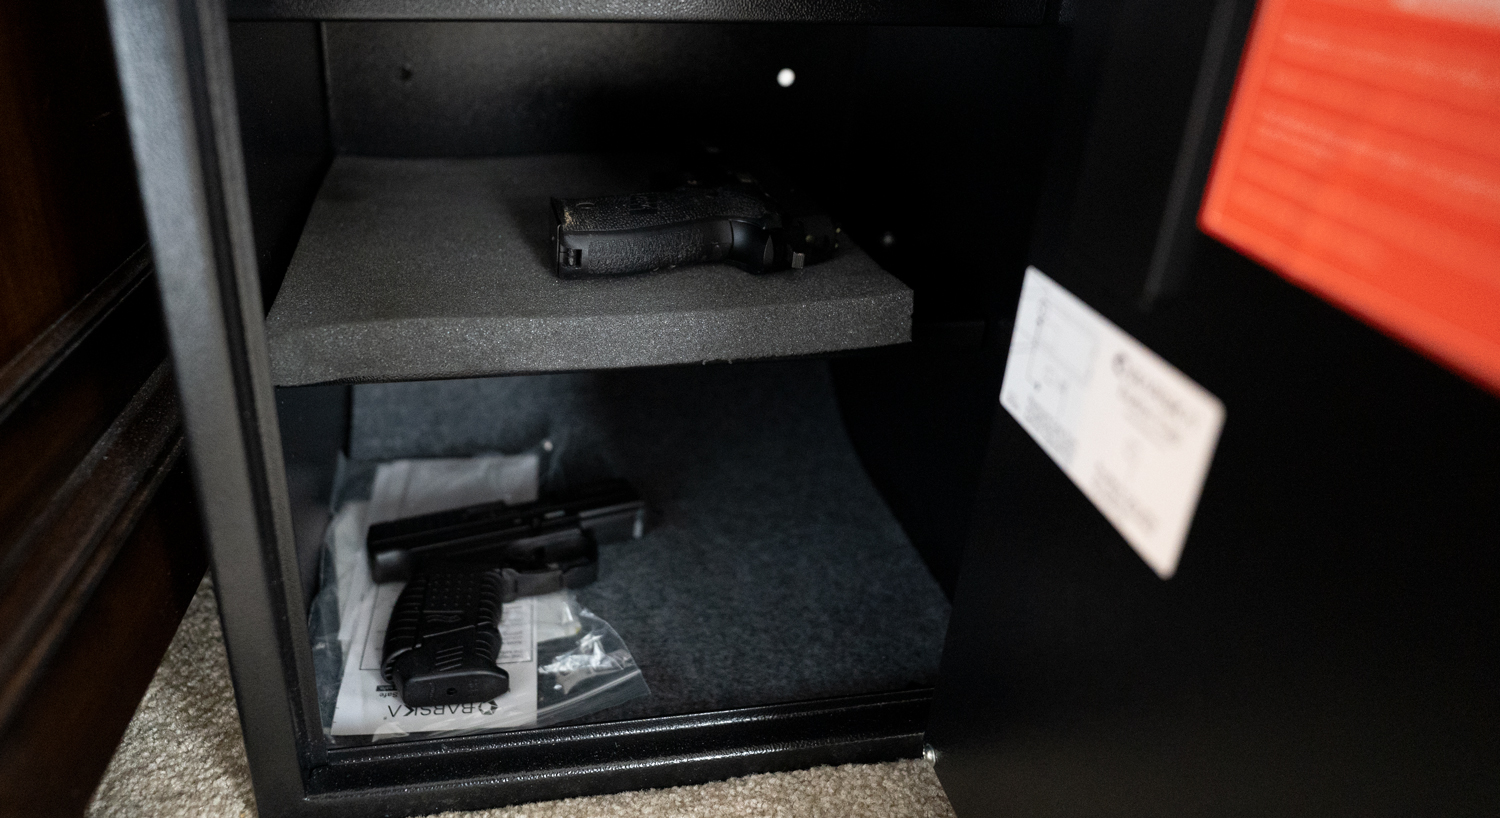 A pair of pistols stored in a safe for home defense